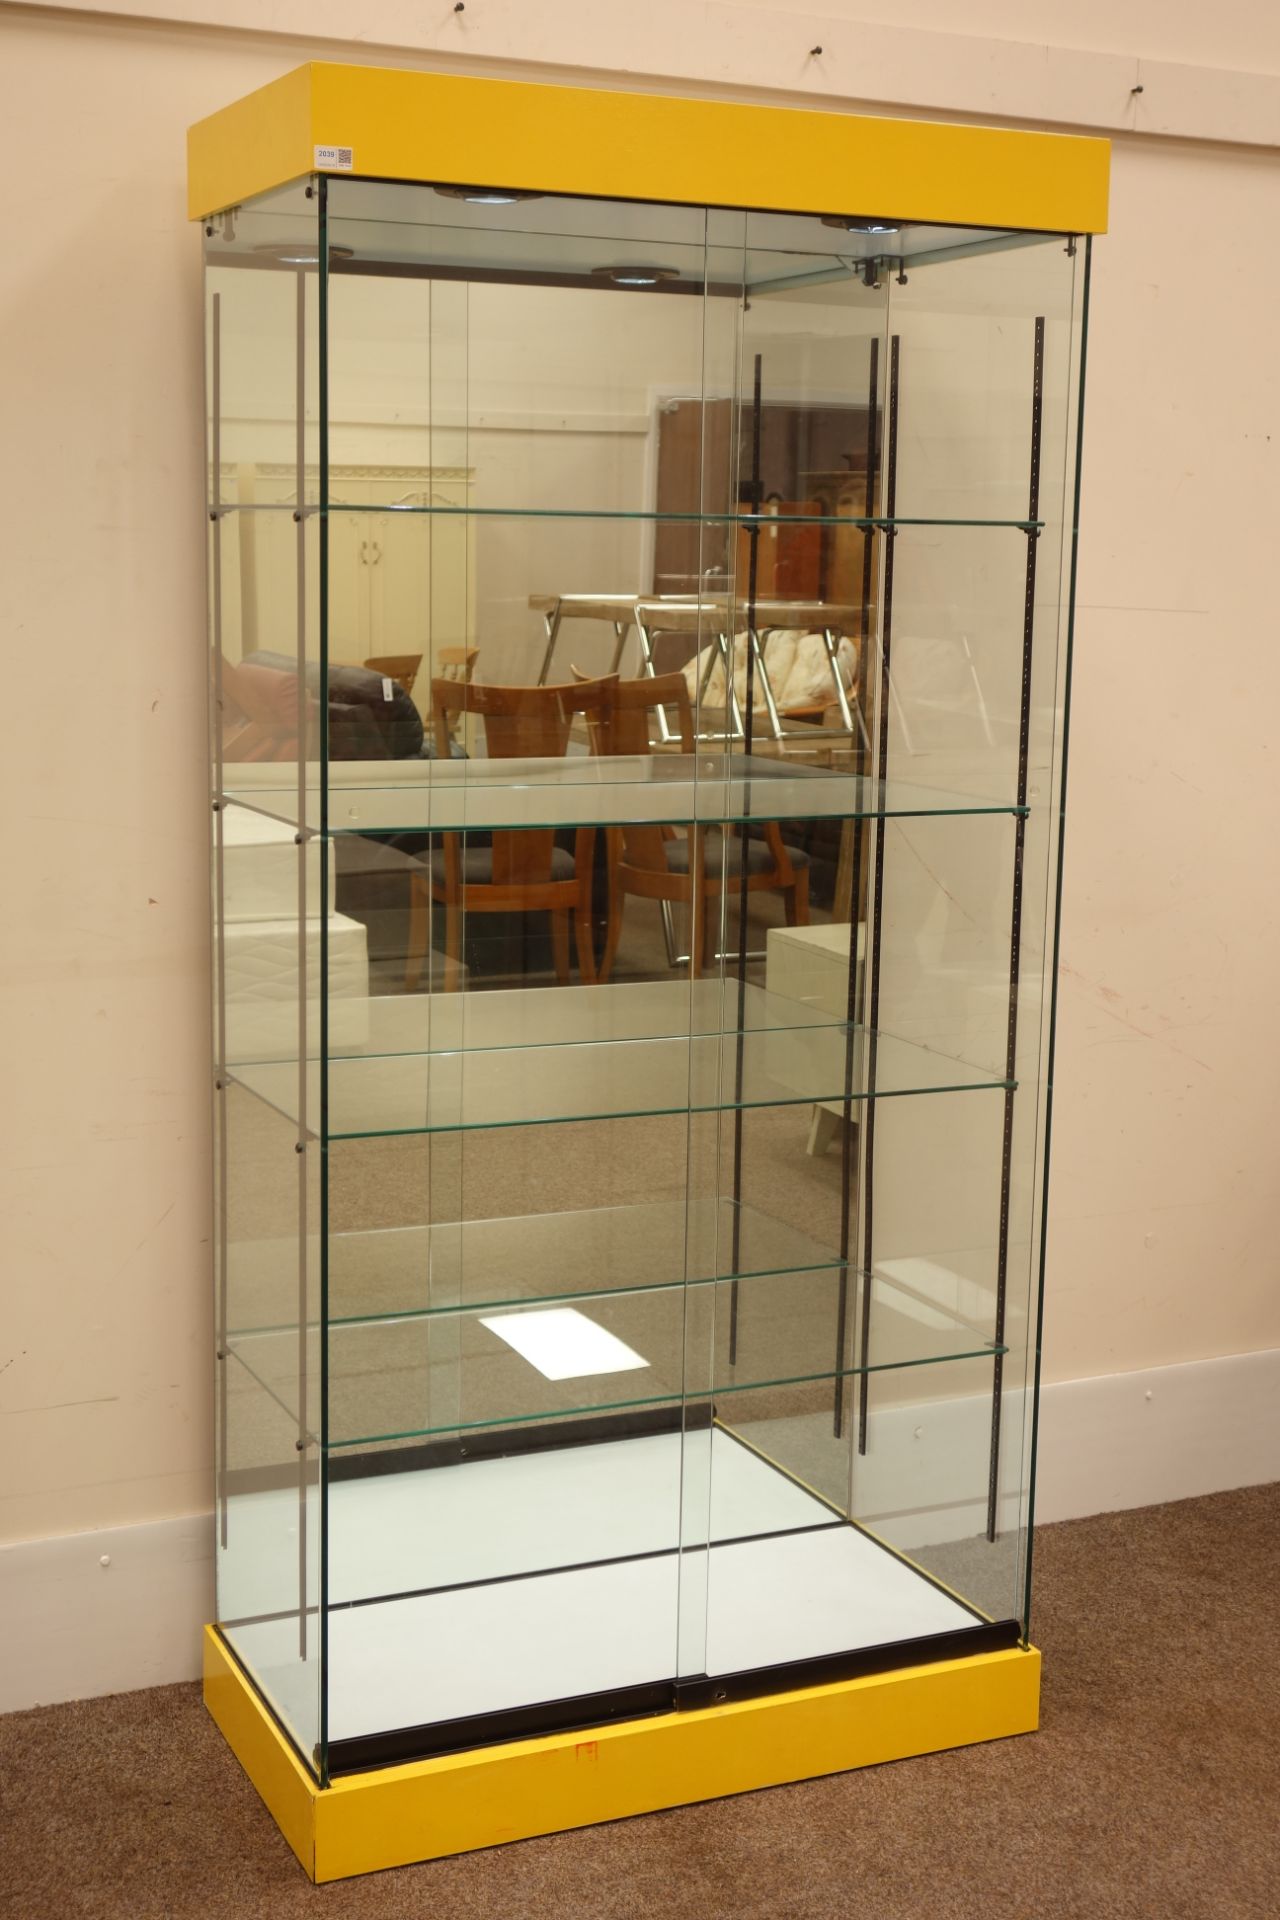 Glazed floor standing shop display cabinet with mirrored back and illuminated interior,